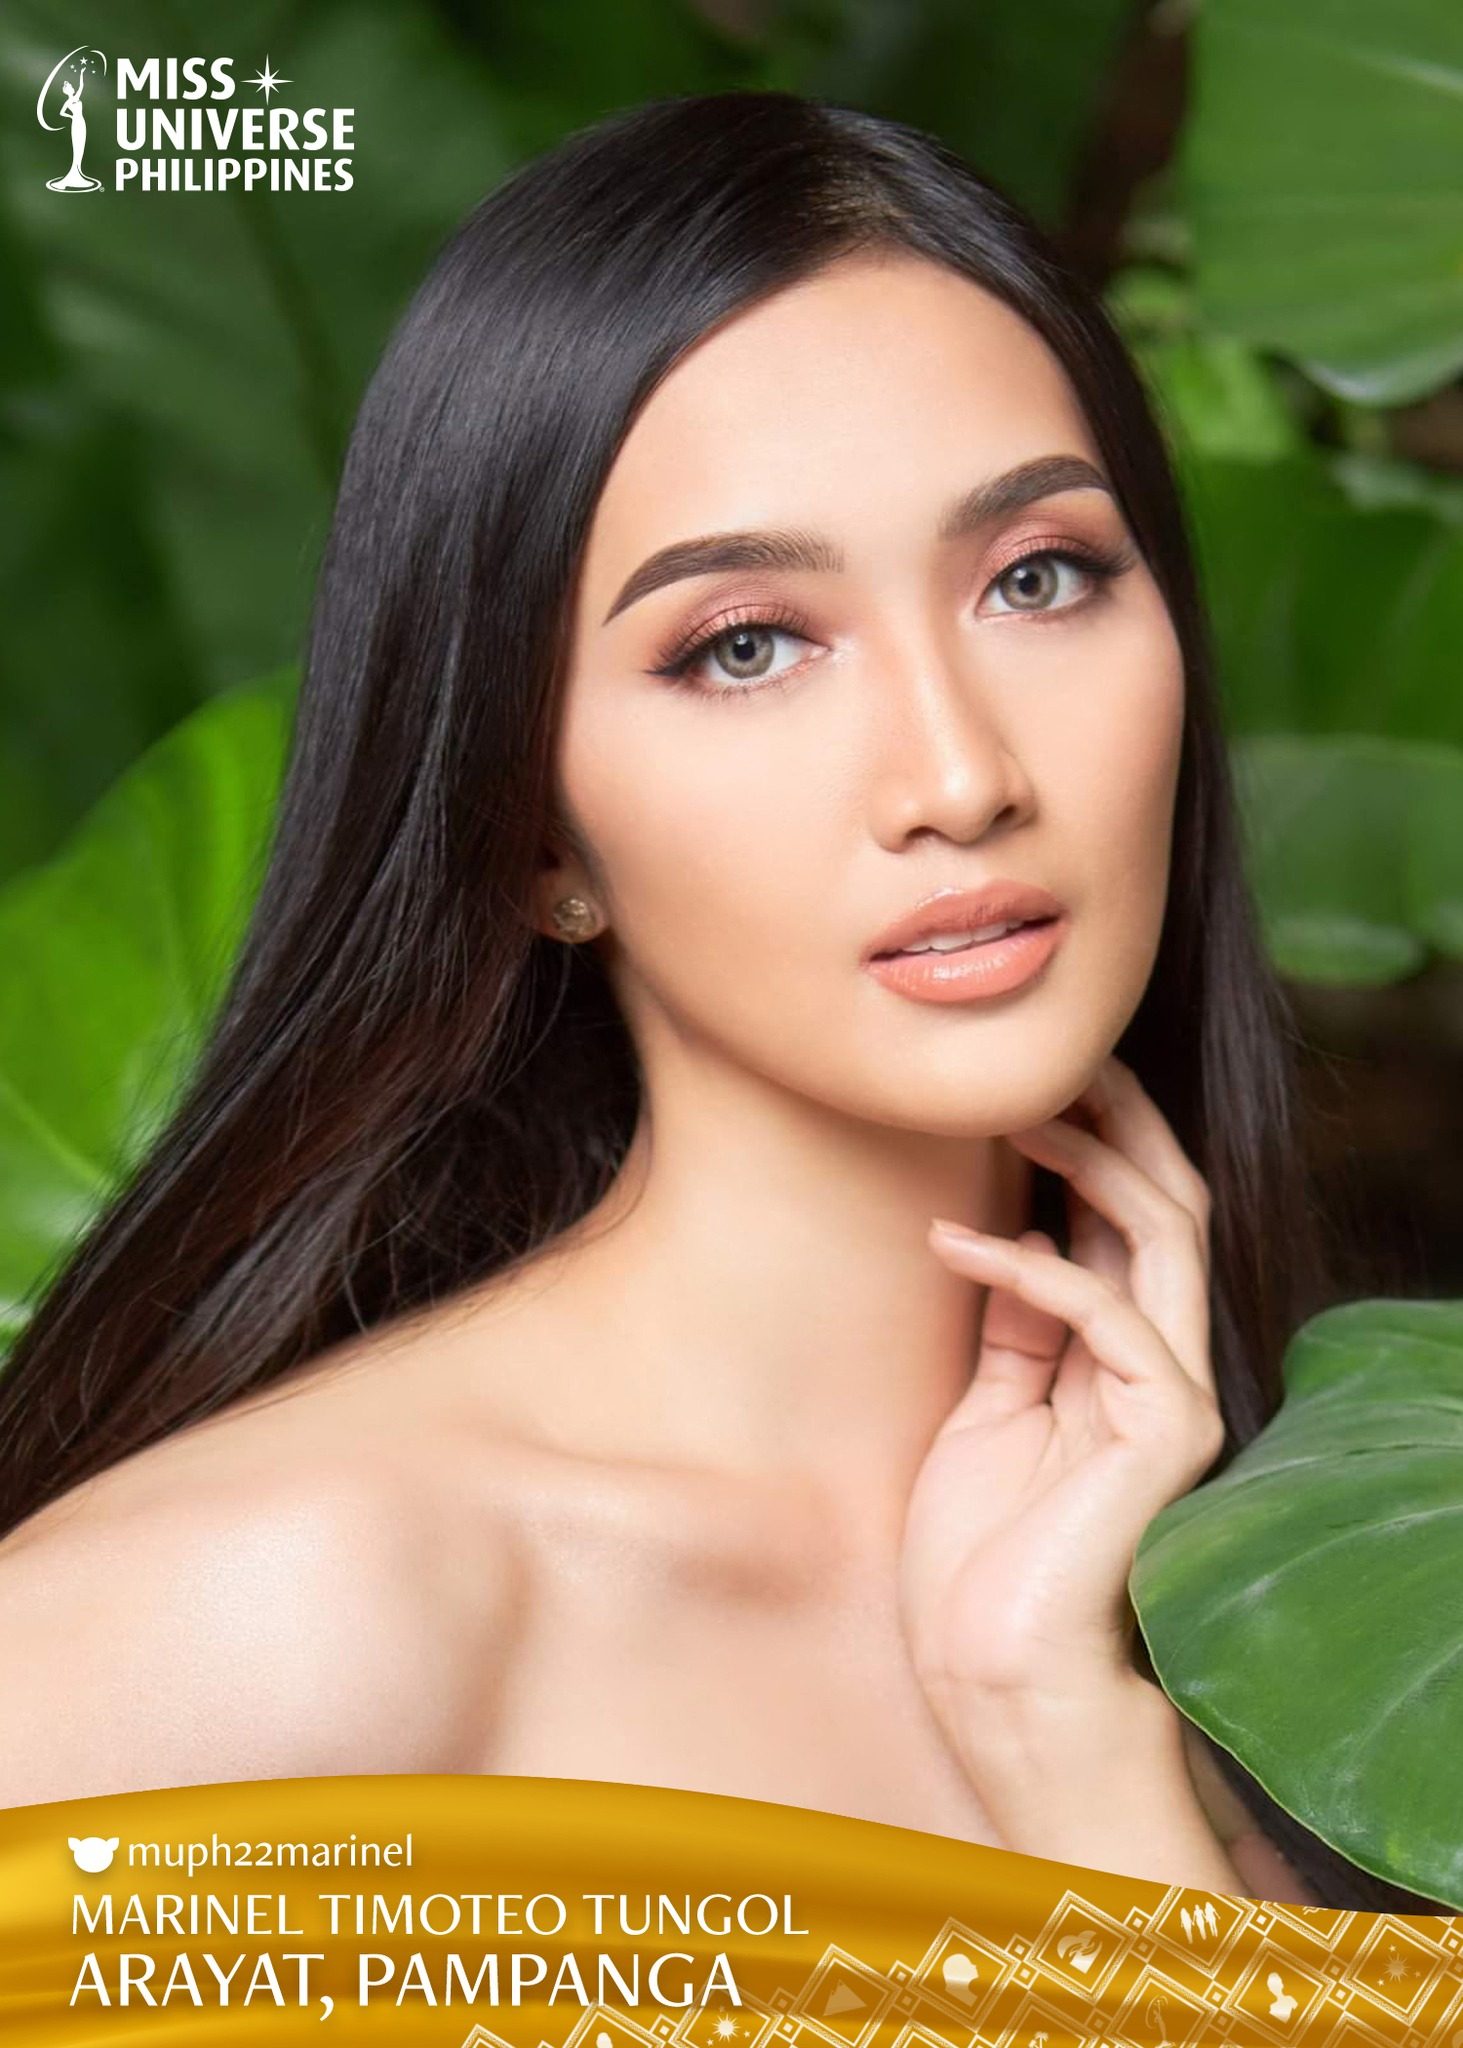 IN PHOTOS The Miss Universe Philippines 2022 delegates’ headshot challenge